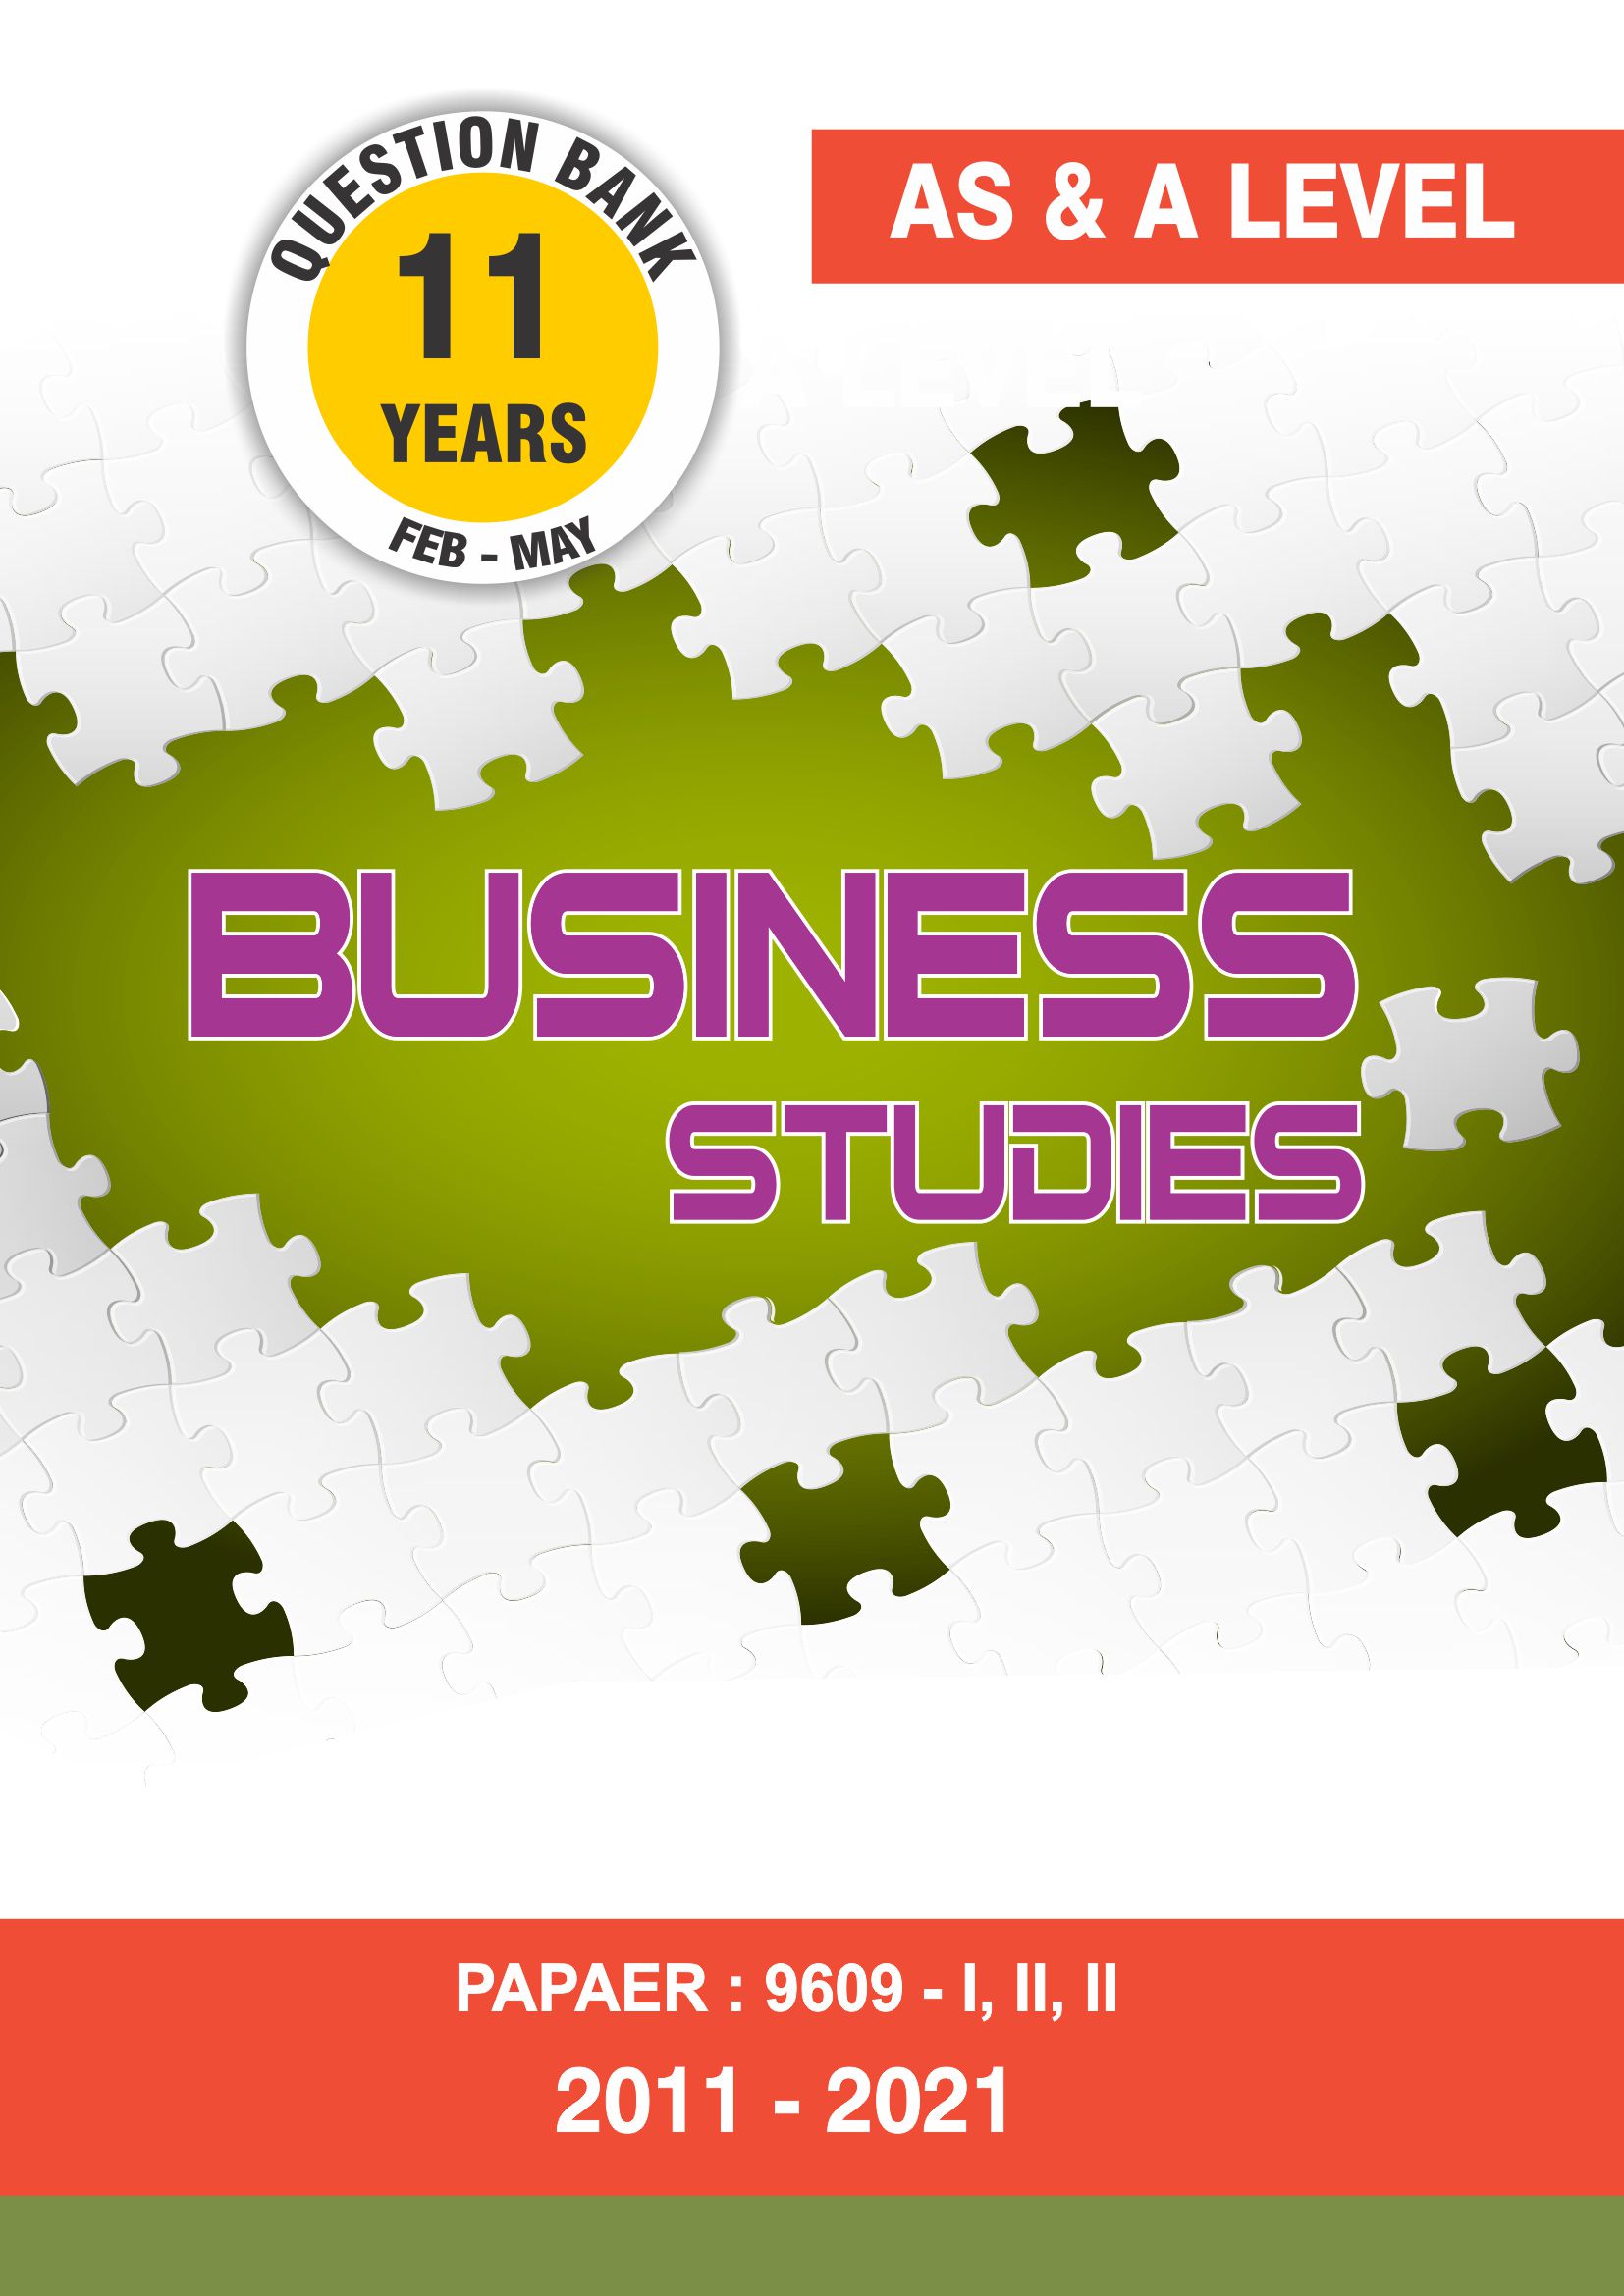 As & A Level Question Bank With Marking Schemes- Business Studies Paper Code 9609 Past 11 Years